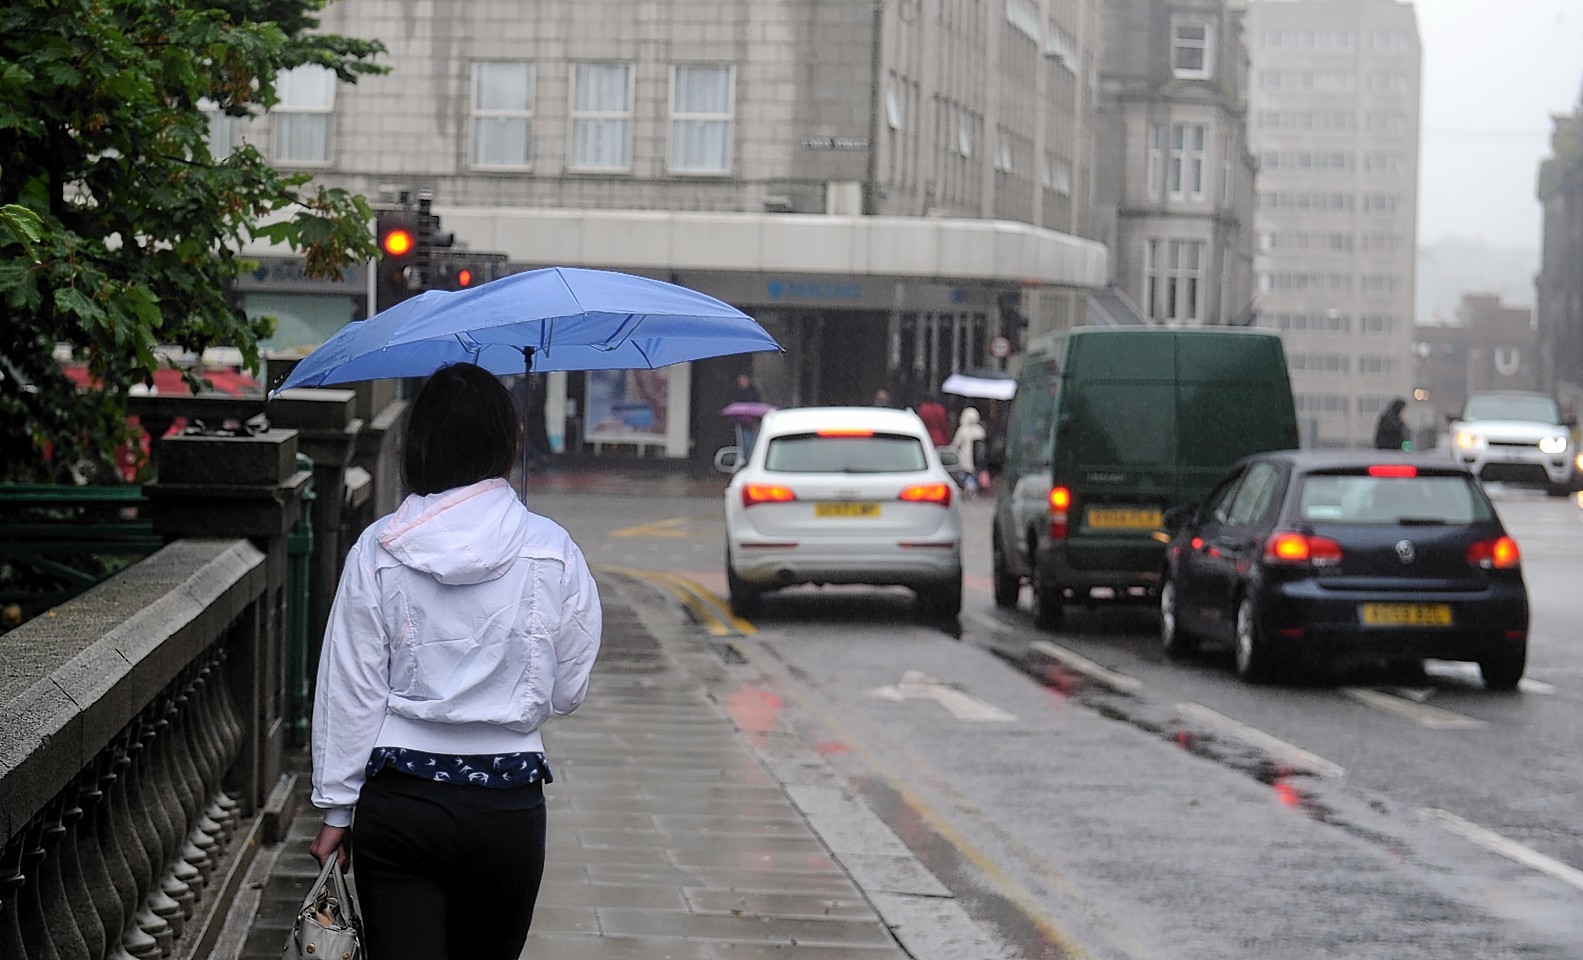 Get your brollies at the ready, Met Office experts believe we are in for heavy rainfall